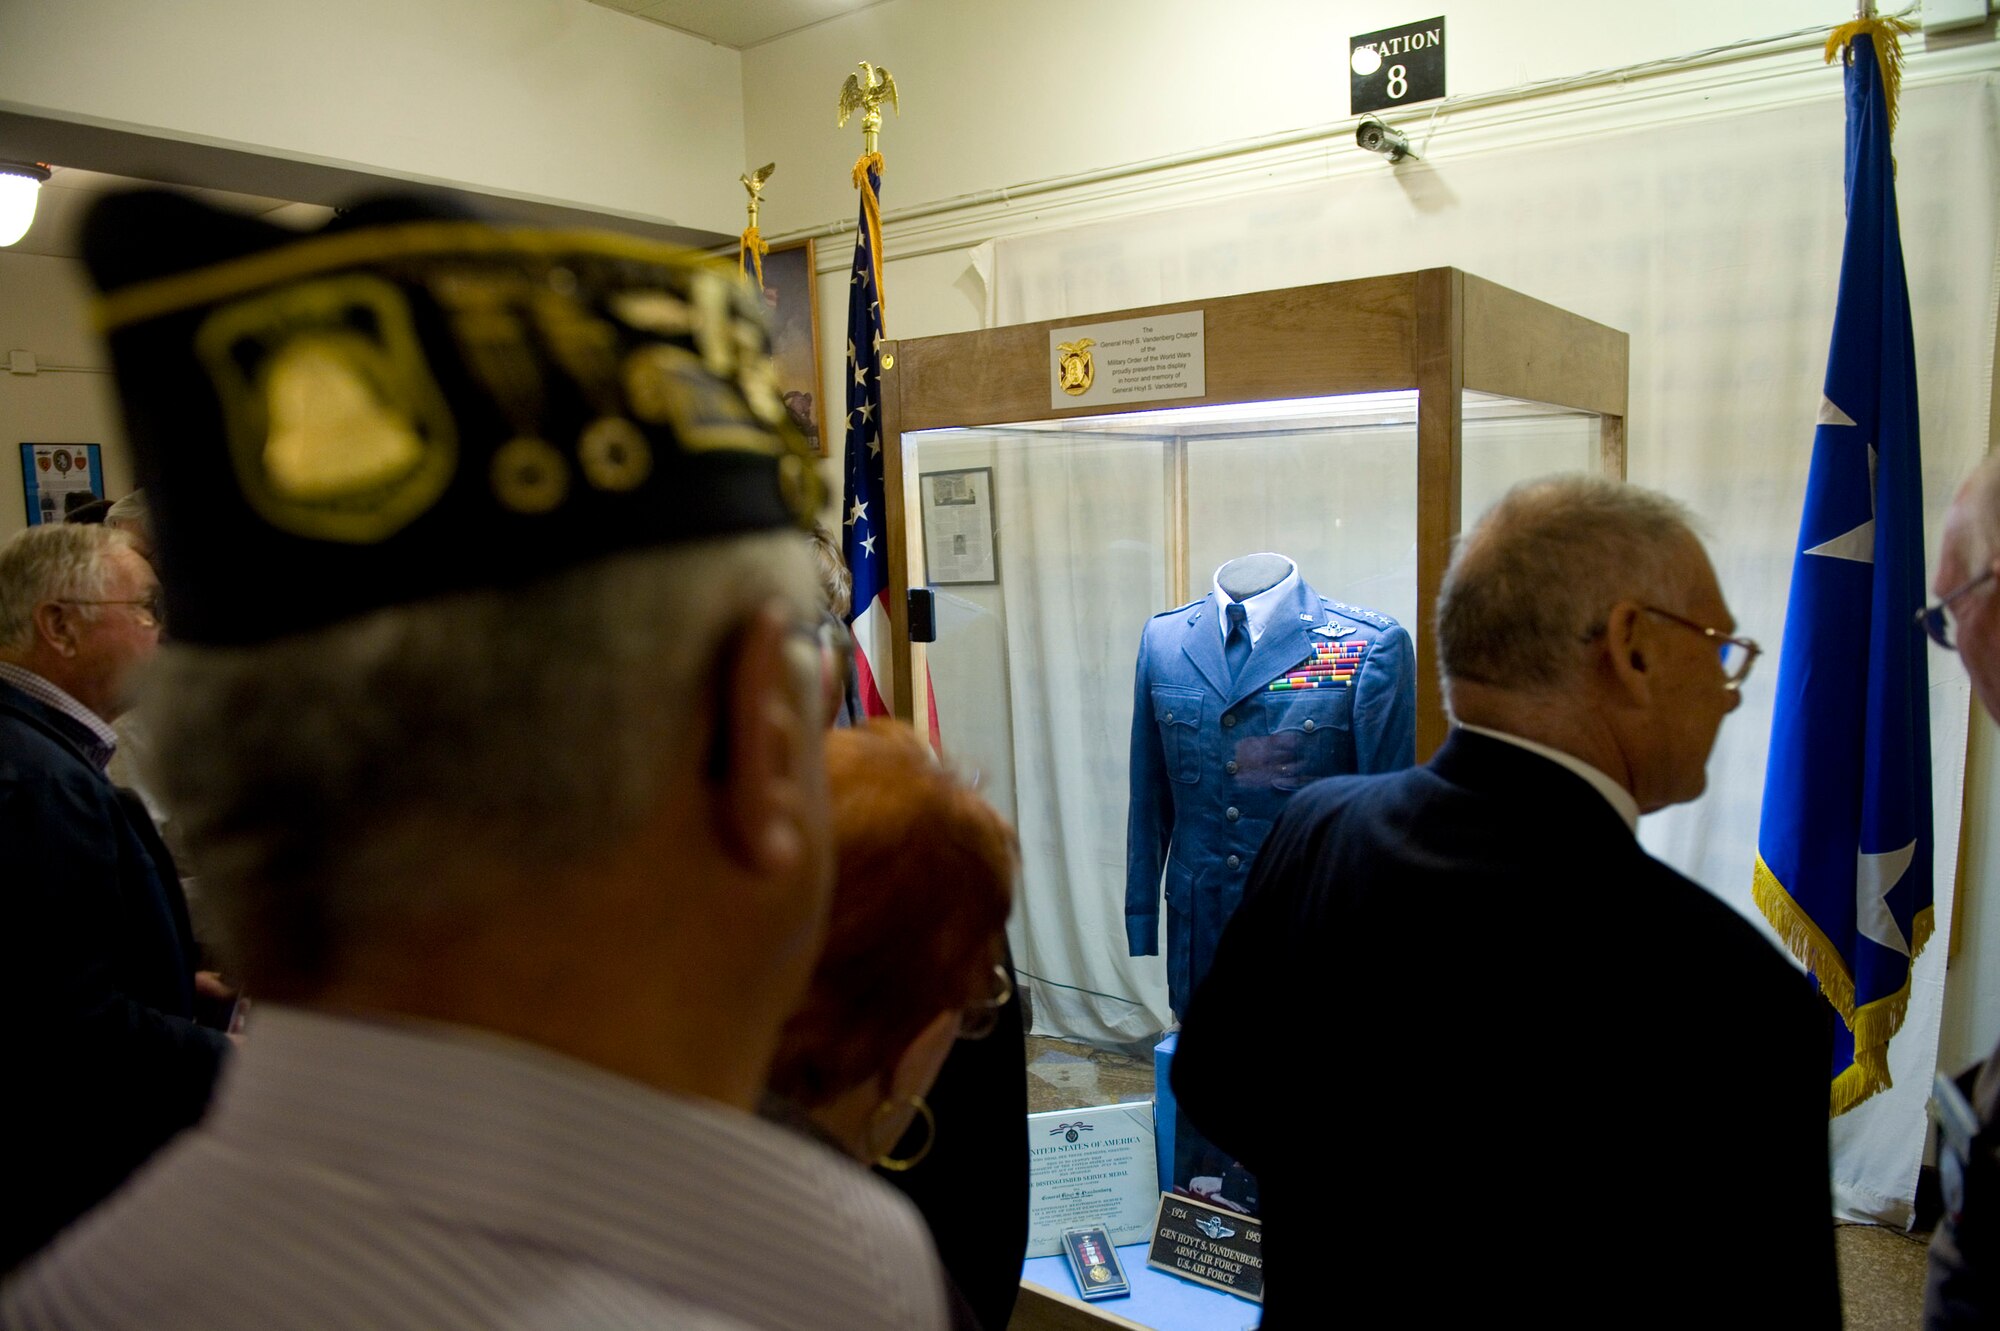 VANDENBERG AIR FORCE BASE, Calif. -- Museum patrons view the Gen. Hoyt S. Vandenberg display at the Central Coast Veterans Memorial Museum in San Luis Obispo, Calif., Tuesday, Nov. 8, 2011. Maj. Gen. Hoyt S. Vandenberg Jr. donated his father' uniform items to the Vandenberg chapter of the Military Order of World War who then loaned the items to the museum for permanent display. Gen. Vandenberg was the Air Force's second Chief of Staff, is known for officially authorizing the Air Force's blue service dress and has Vandenberg Air Force Base named after him. (U.S. Air Force photo/Staff Sgt. Levi Riendeau)
